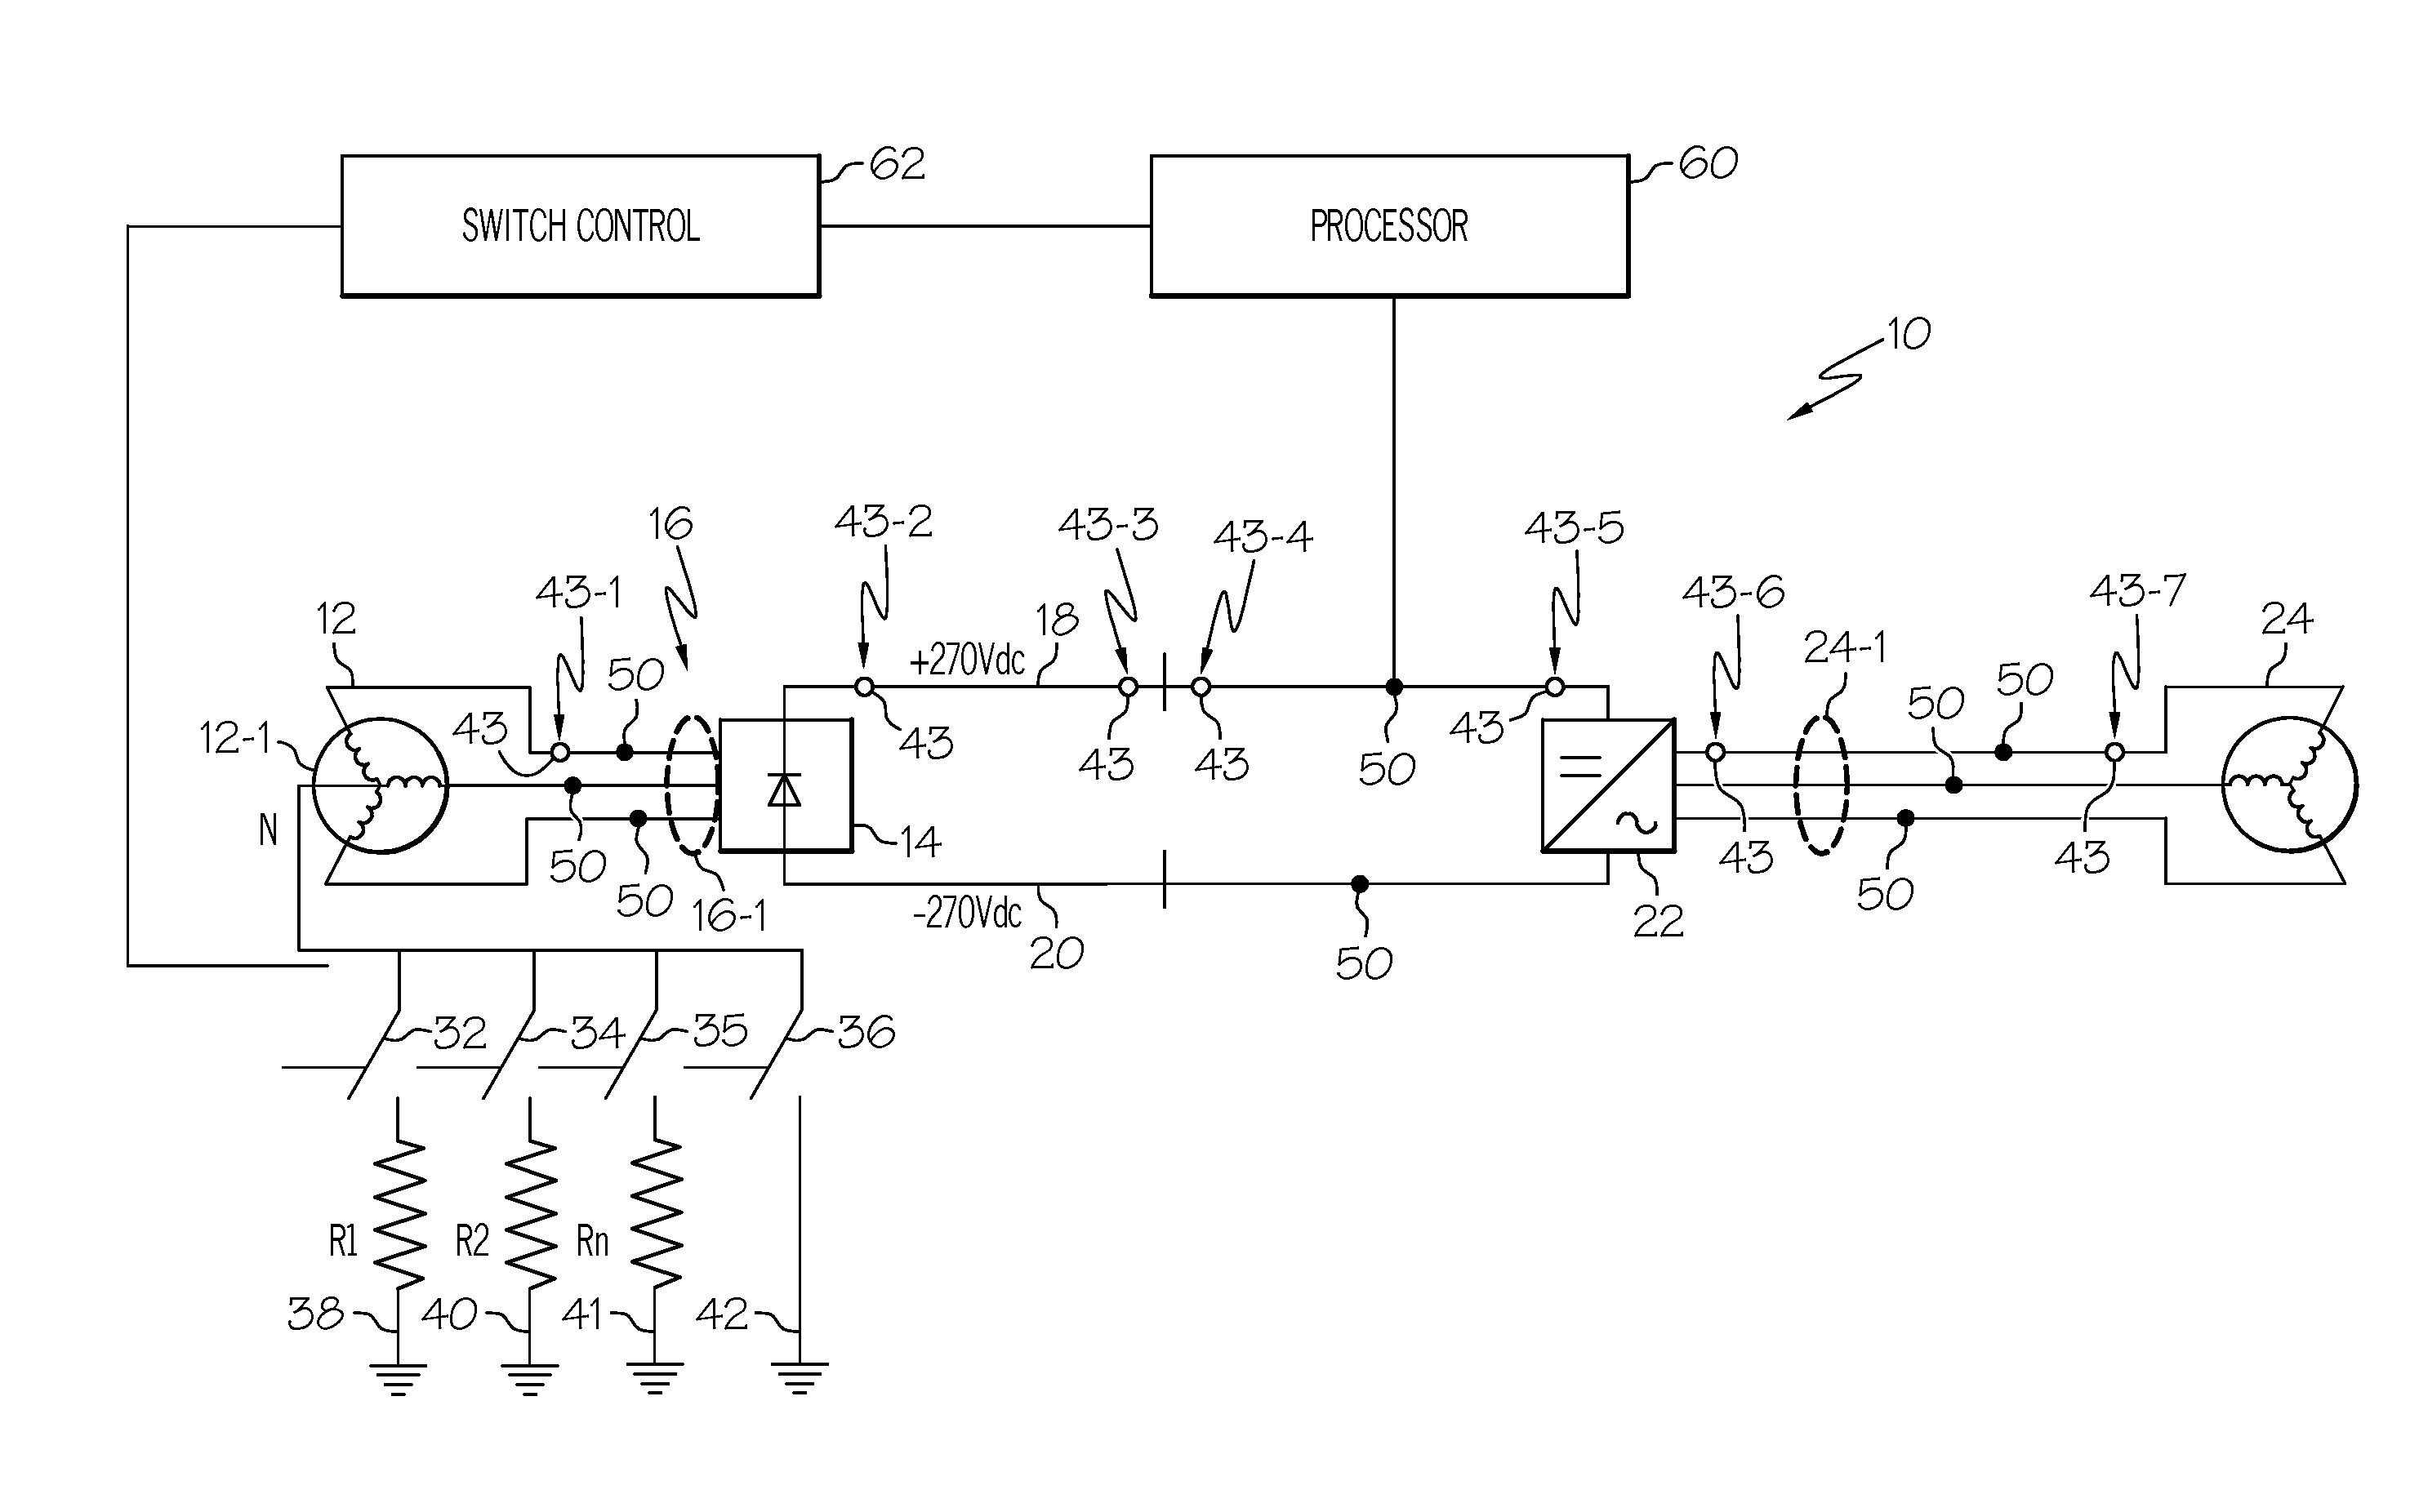 Ground fault detection and localization in an ungrounded or floating DC electrical system